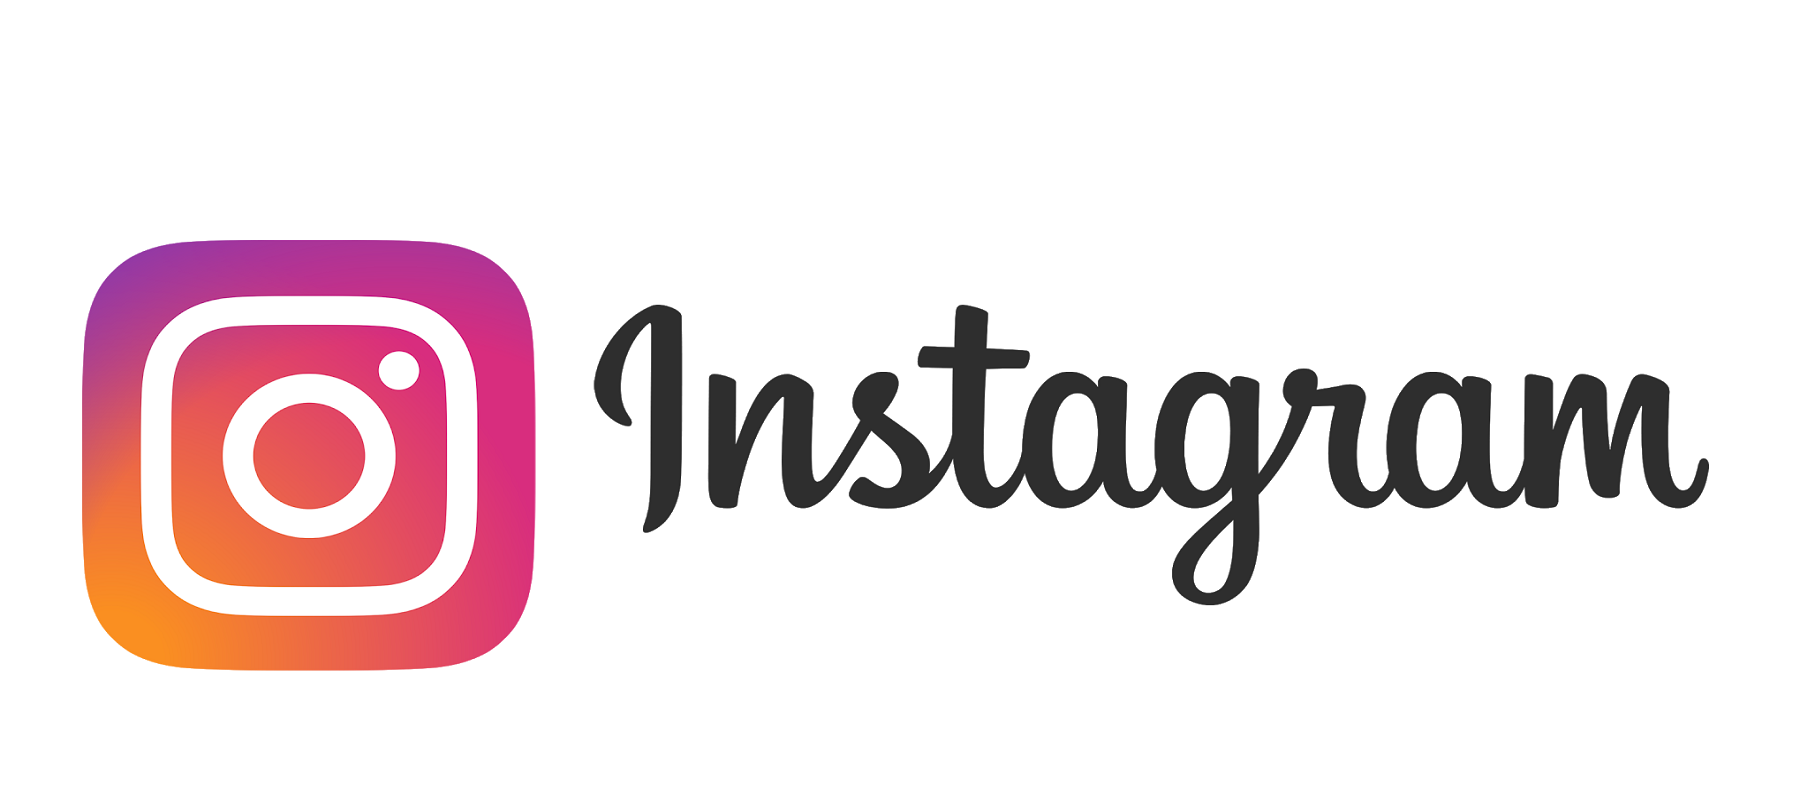 Instagram advertising audience grows to 1.64 billion, 420 million more than TikTok's potential ad reach, report